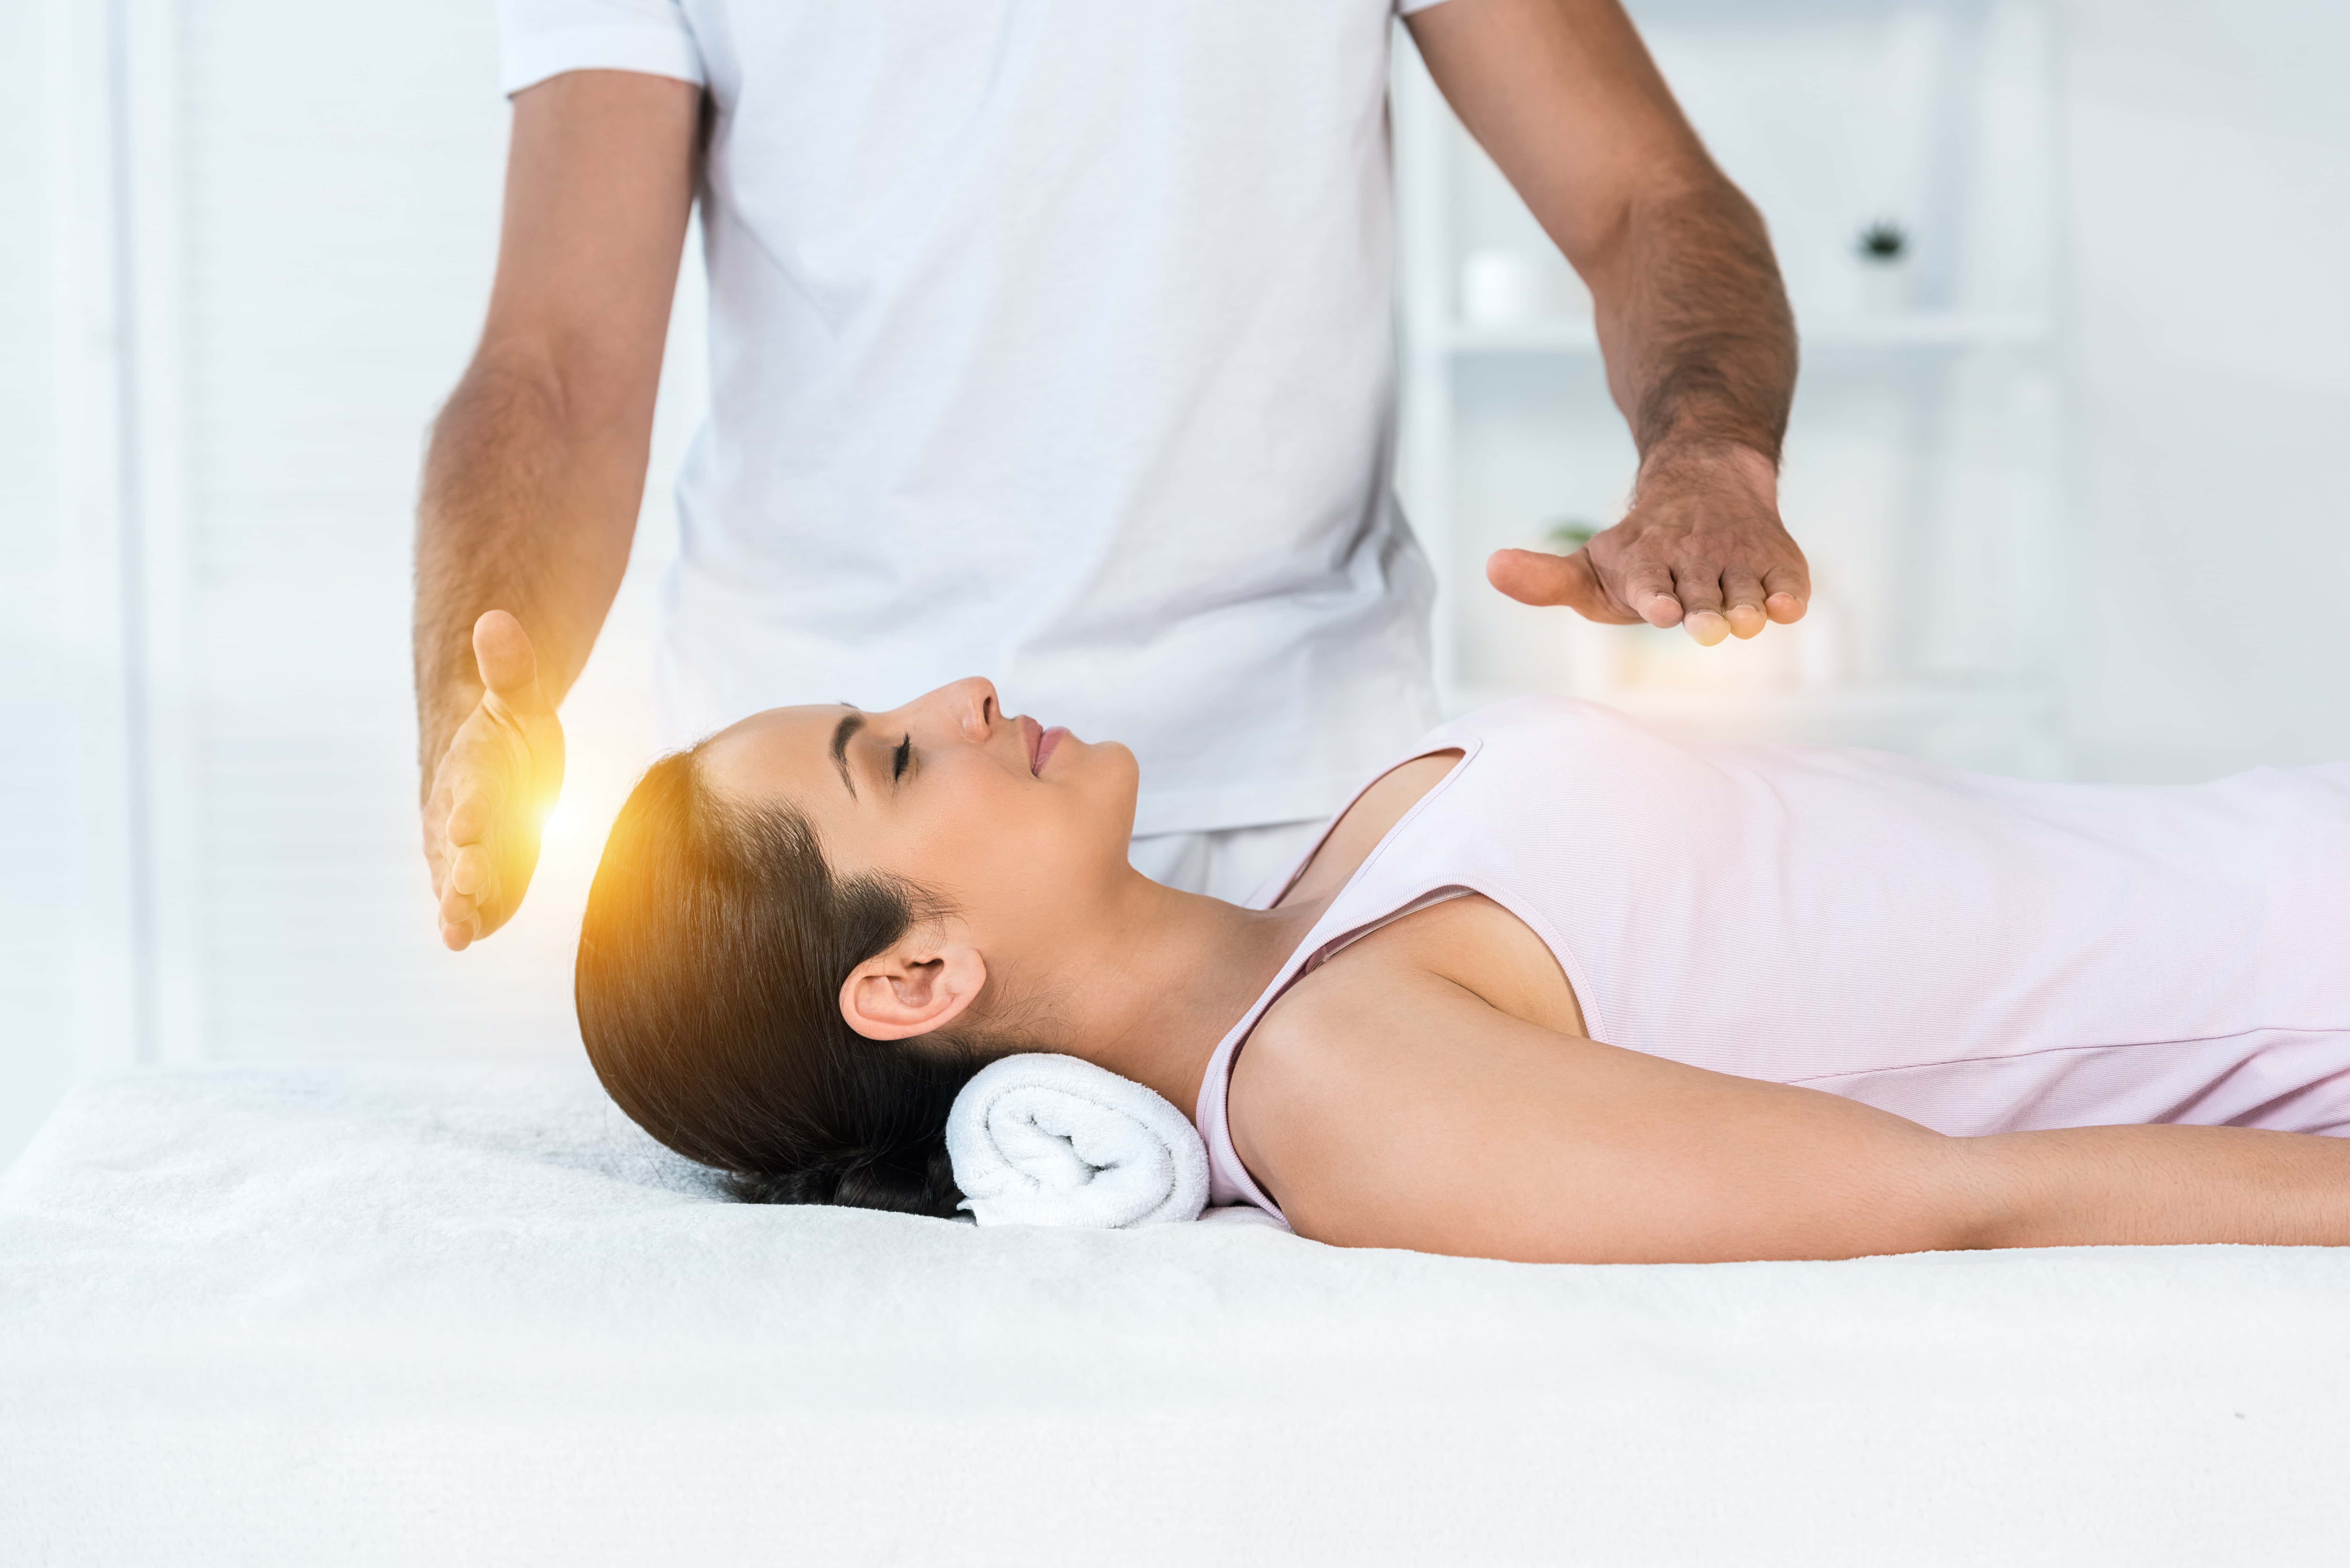 A women being treated by reiki.